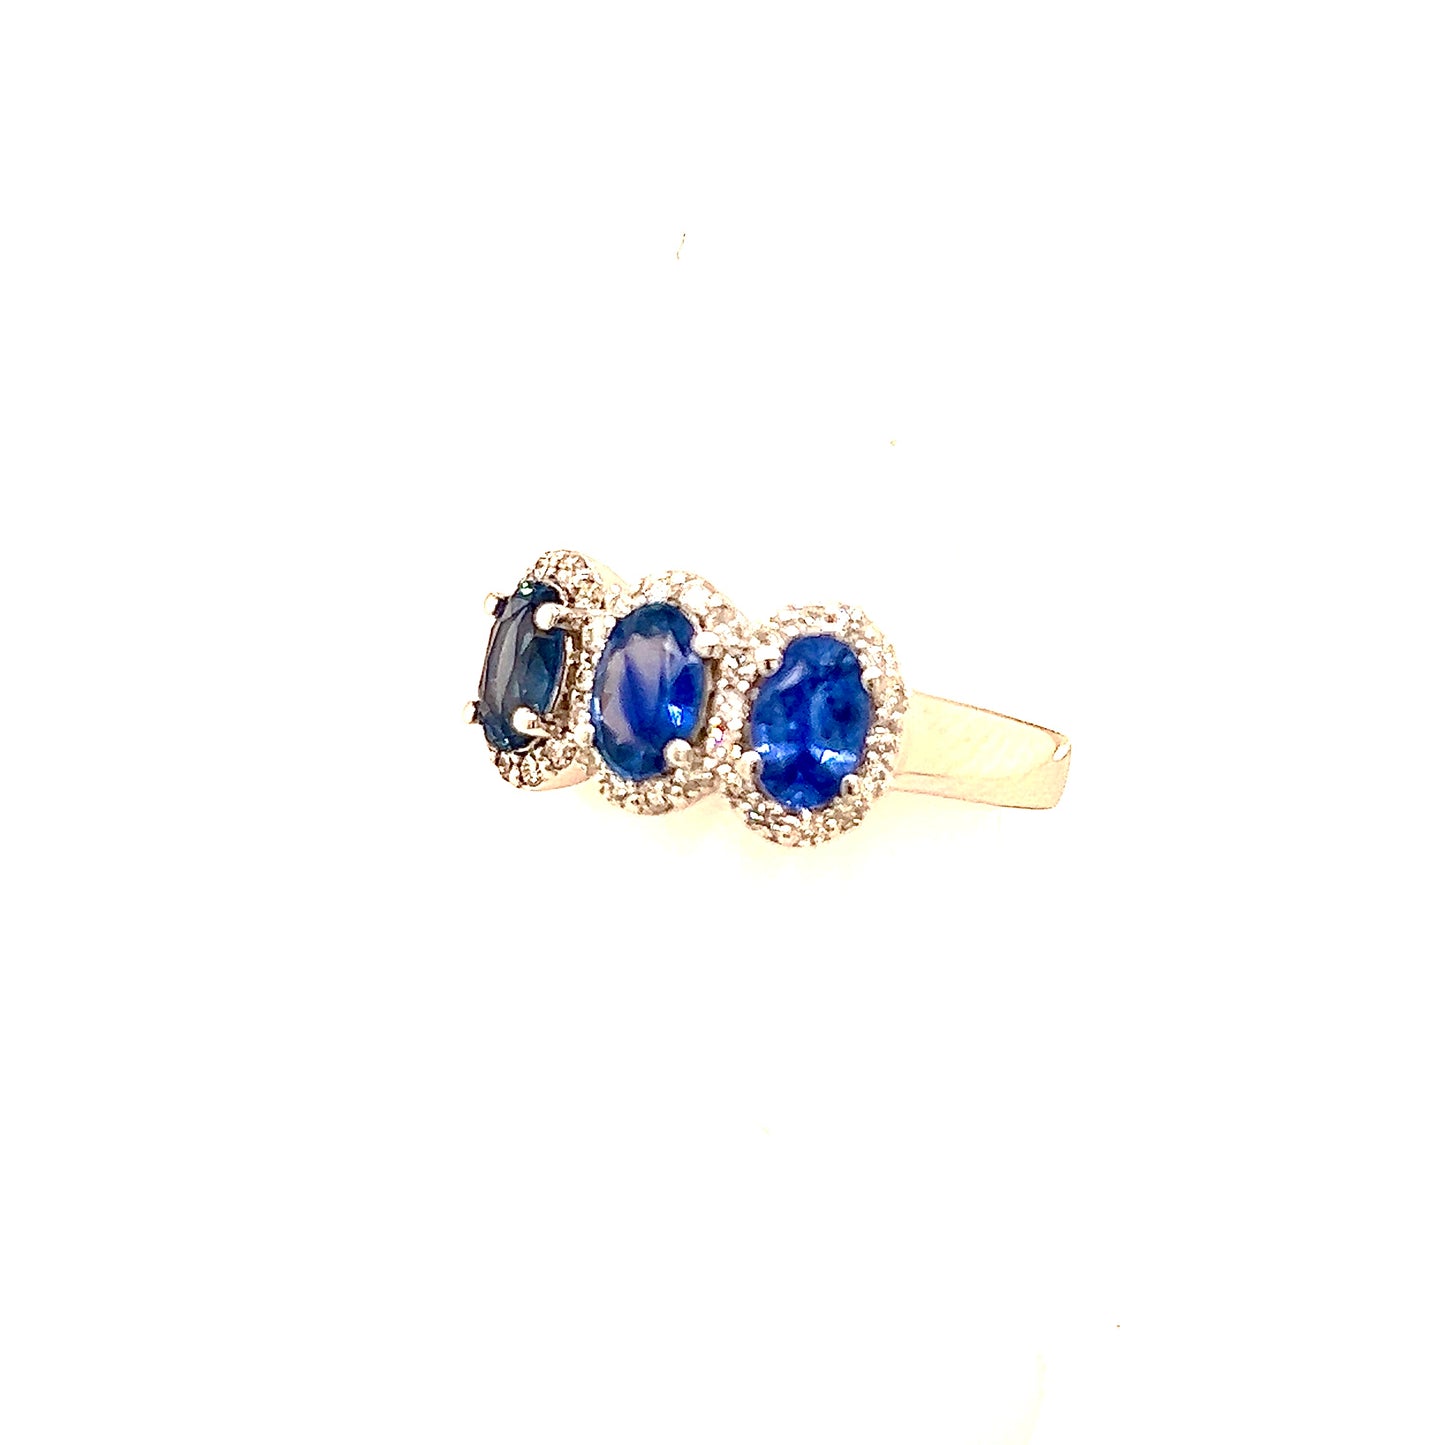 Natural Sapphire Diamond Ring 7 14k W Gold 1.67 TCW Certified $4,975 218113